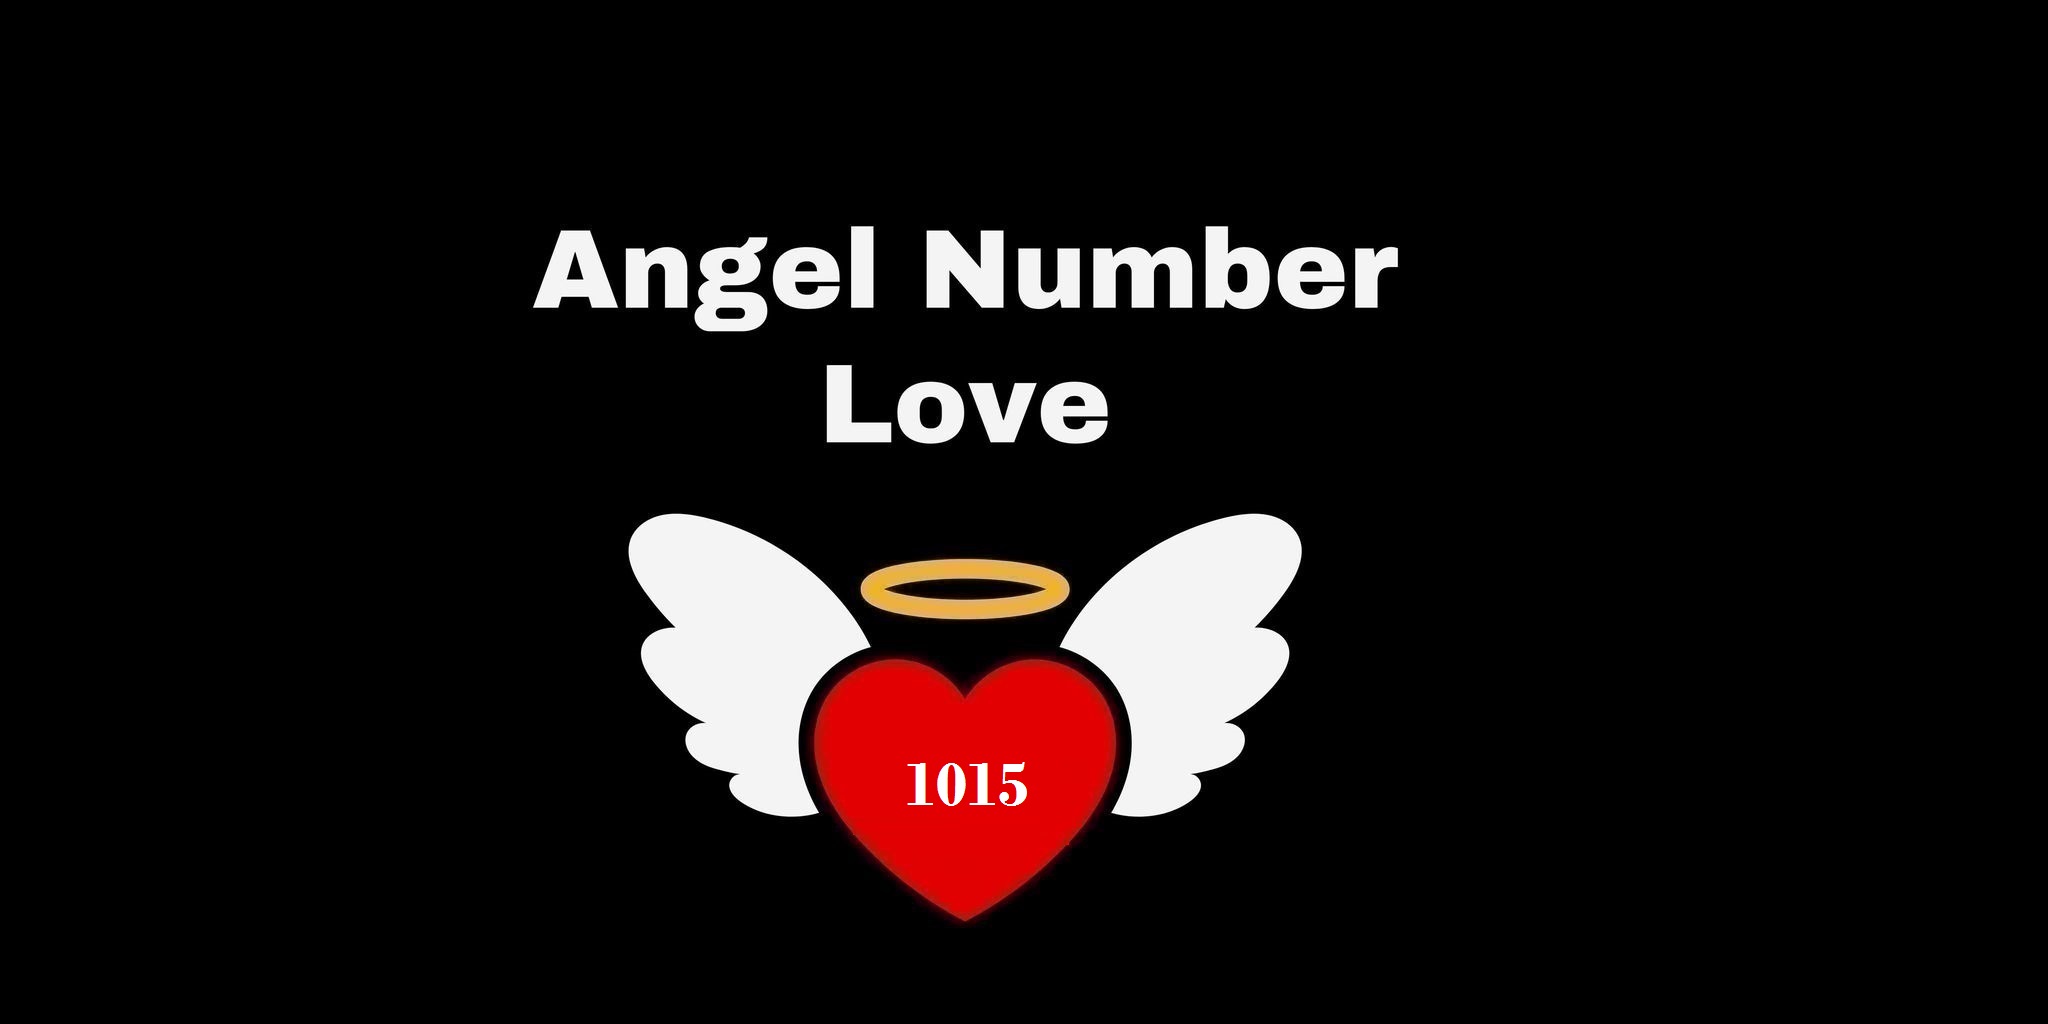 1015 Angel Number Meaning In Love